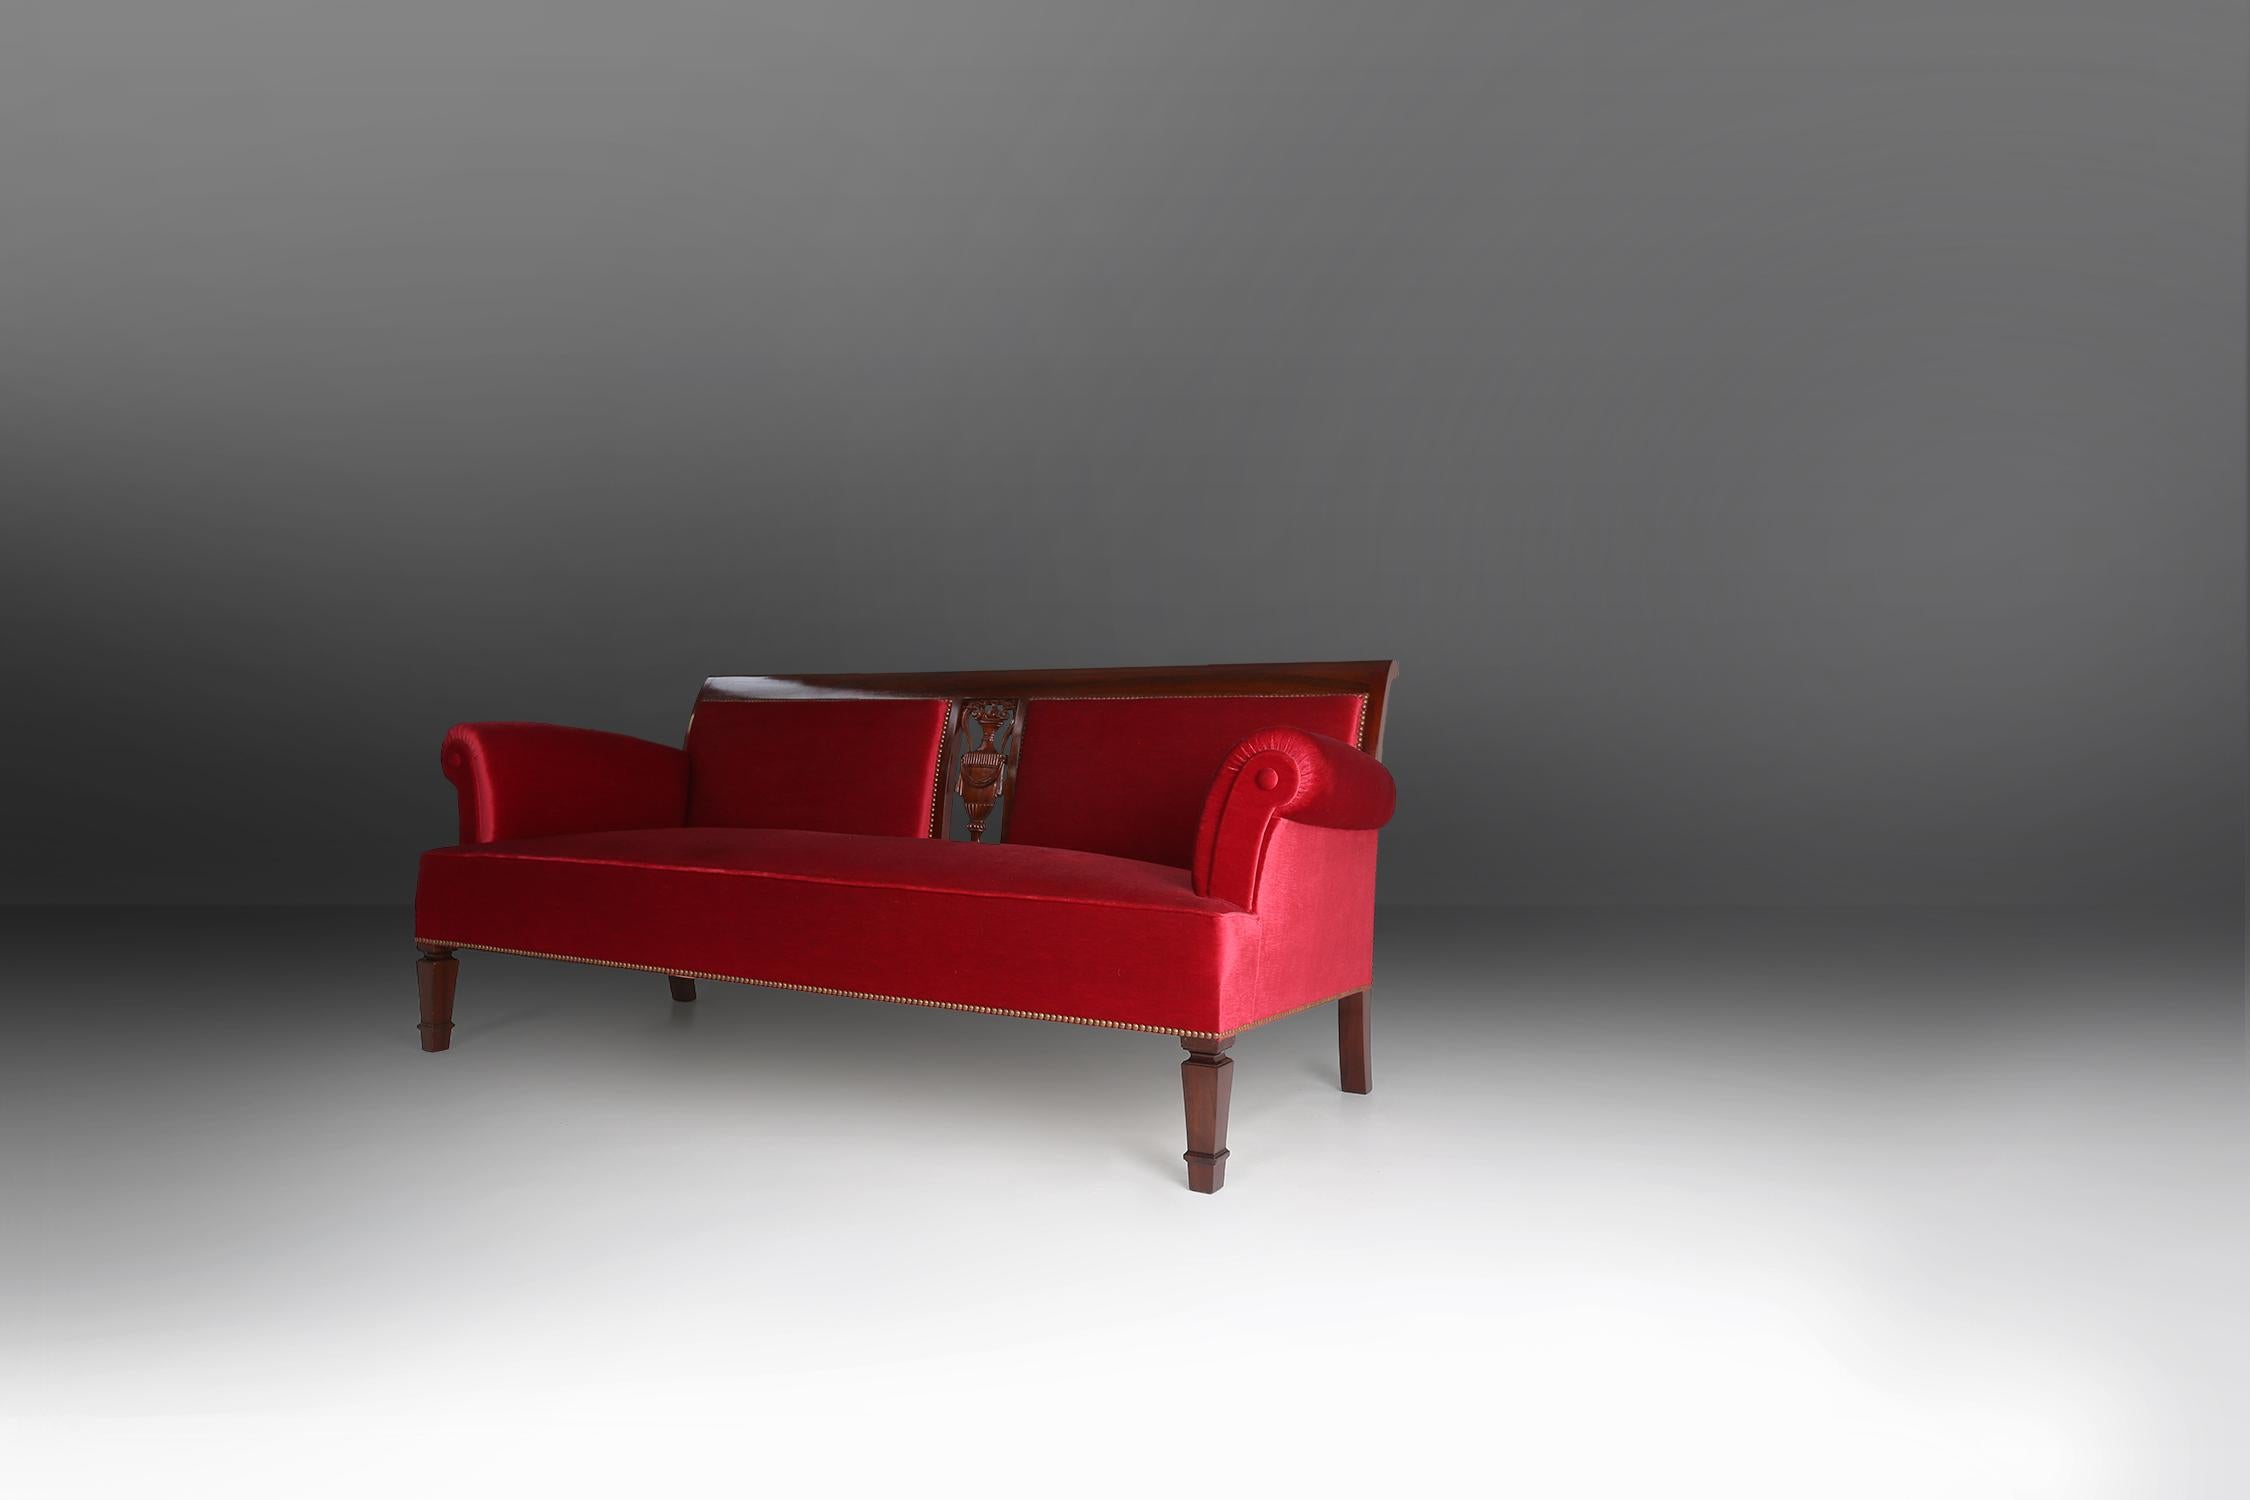 Empire style sofa made in high quality wood and red fabric. in a very good condition. with some nice details in the middle of the bench.
 